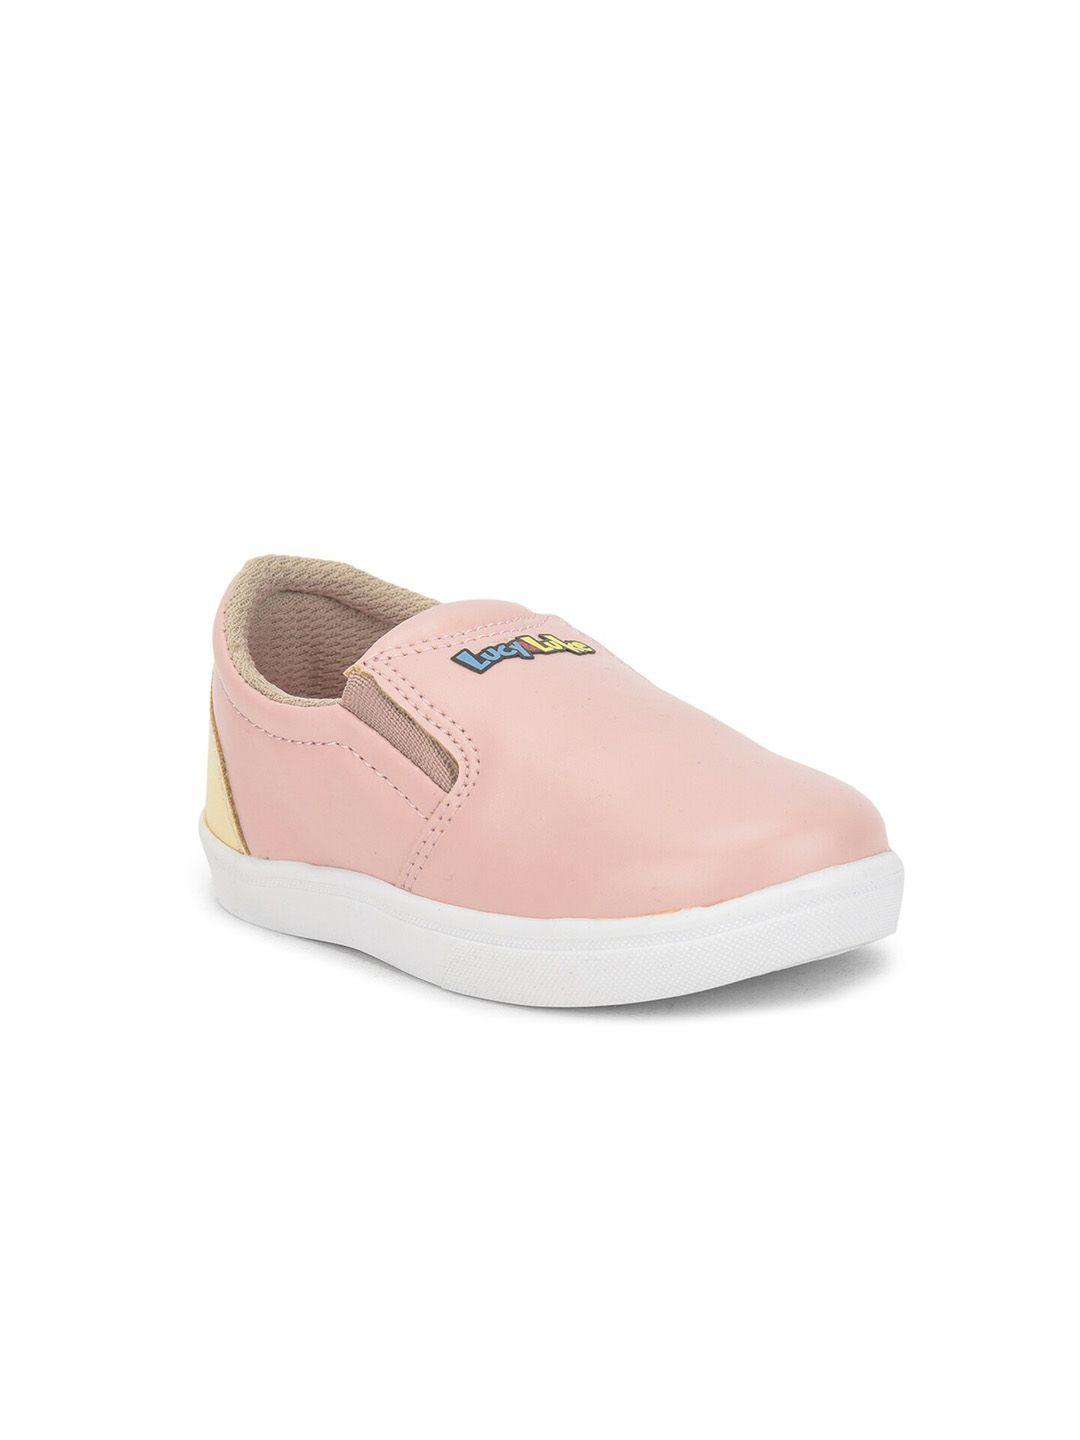 liberty-boys-peach-coloured-solid-slip-on-sneakers